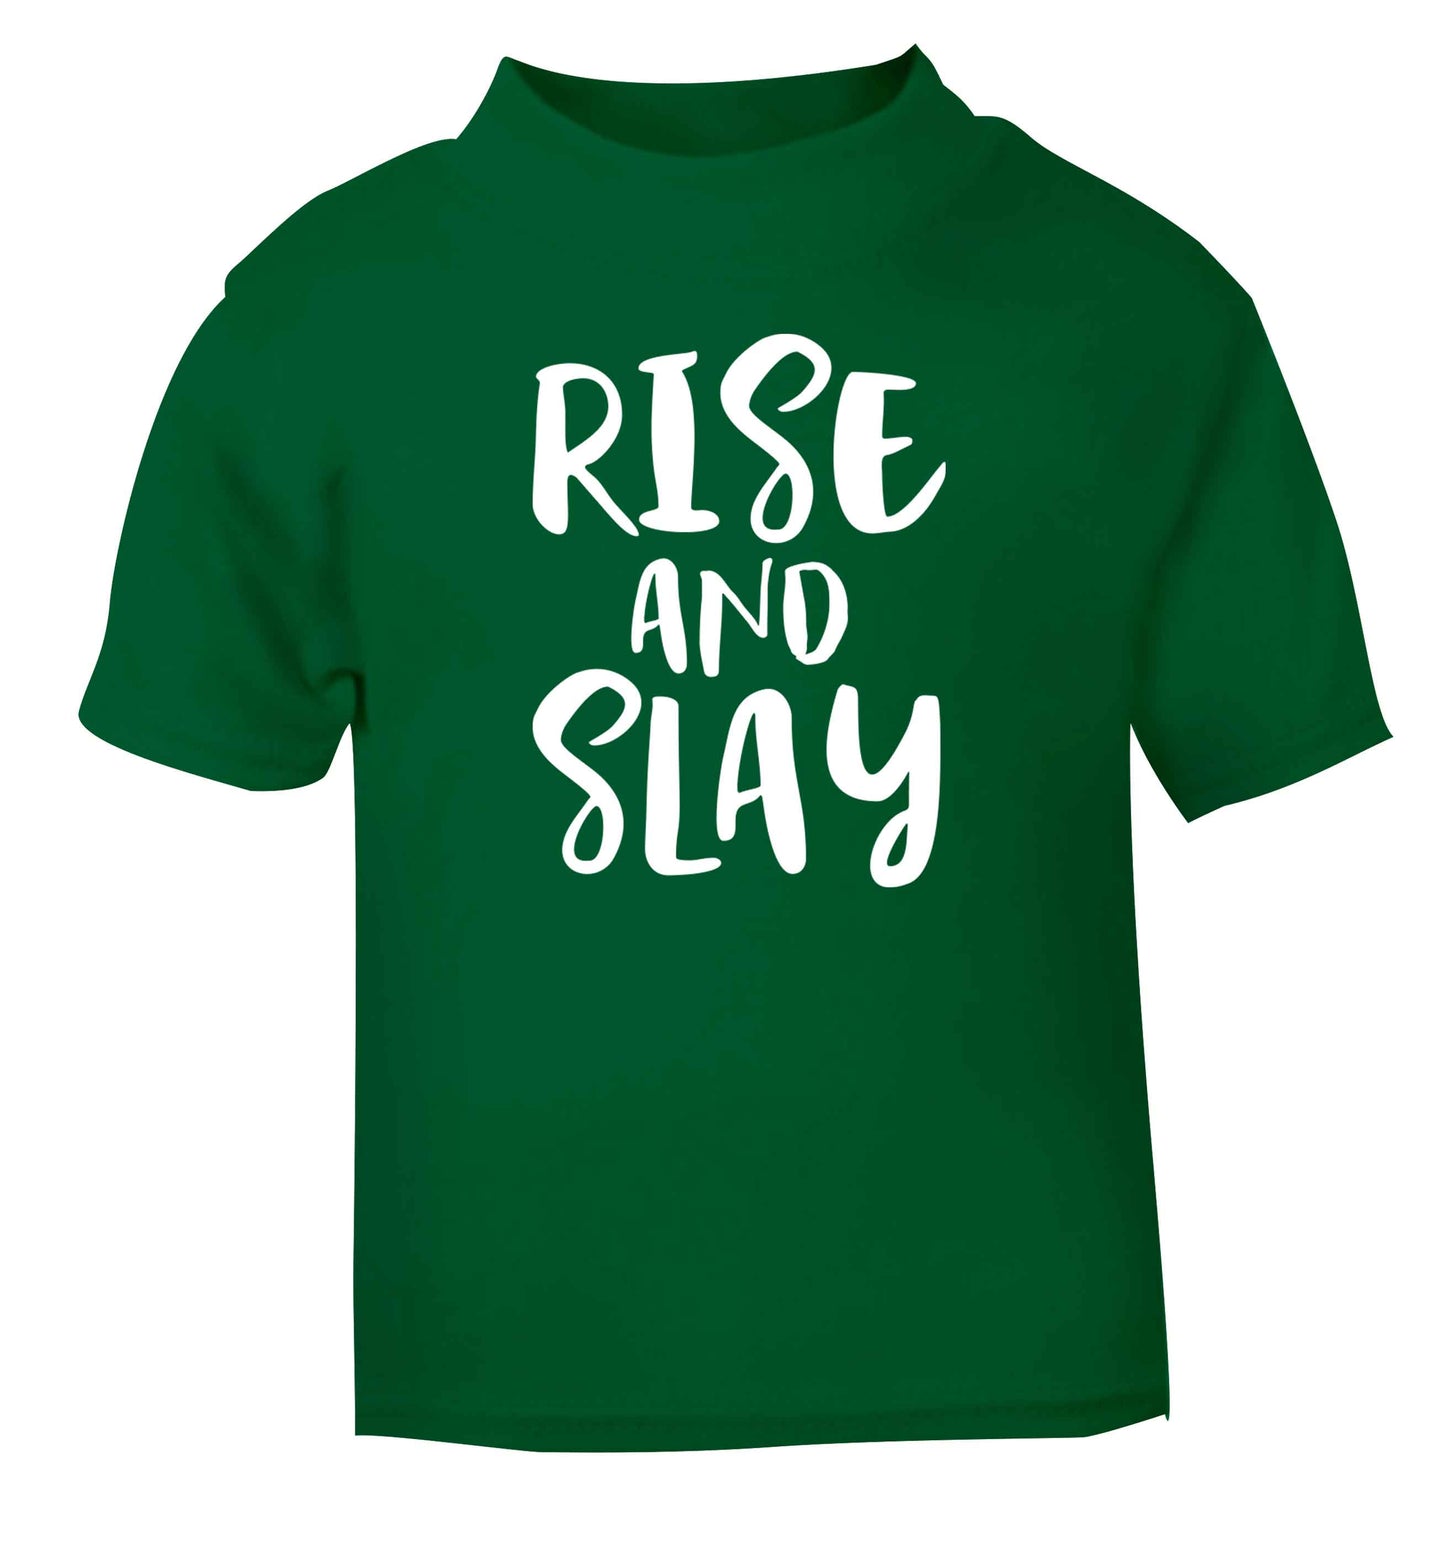 Rise and slay green Baby Toddler Tshirt 2 Years